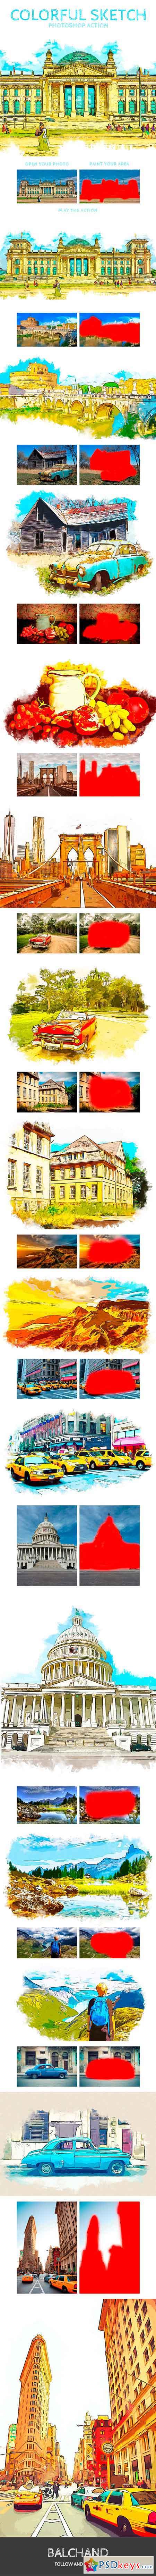 Colorful Sketch Photoshop Action 20277005